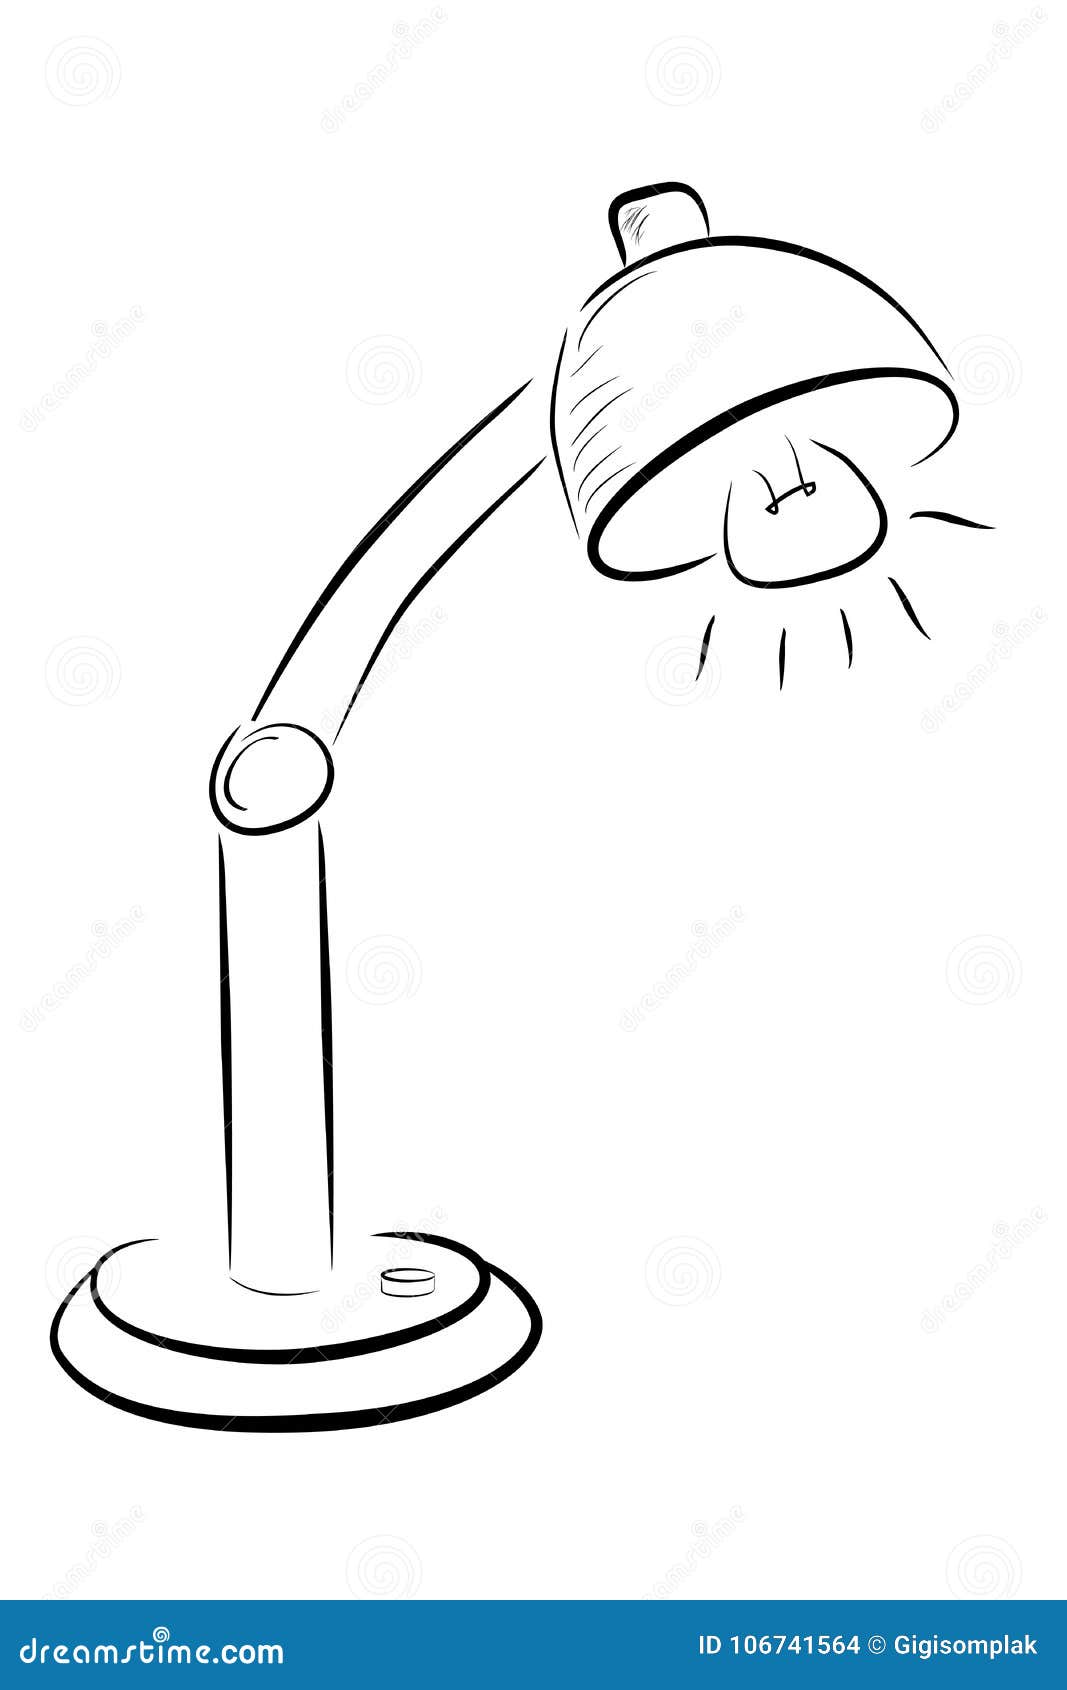 Simple Sketch Desk Lamp Isolated On White Stock Vector